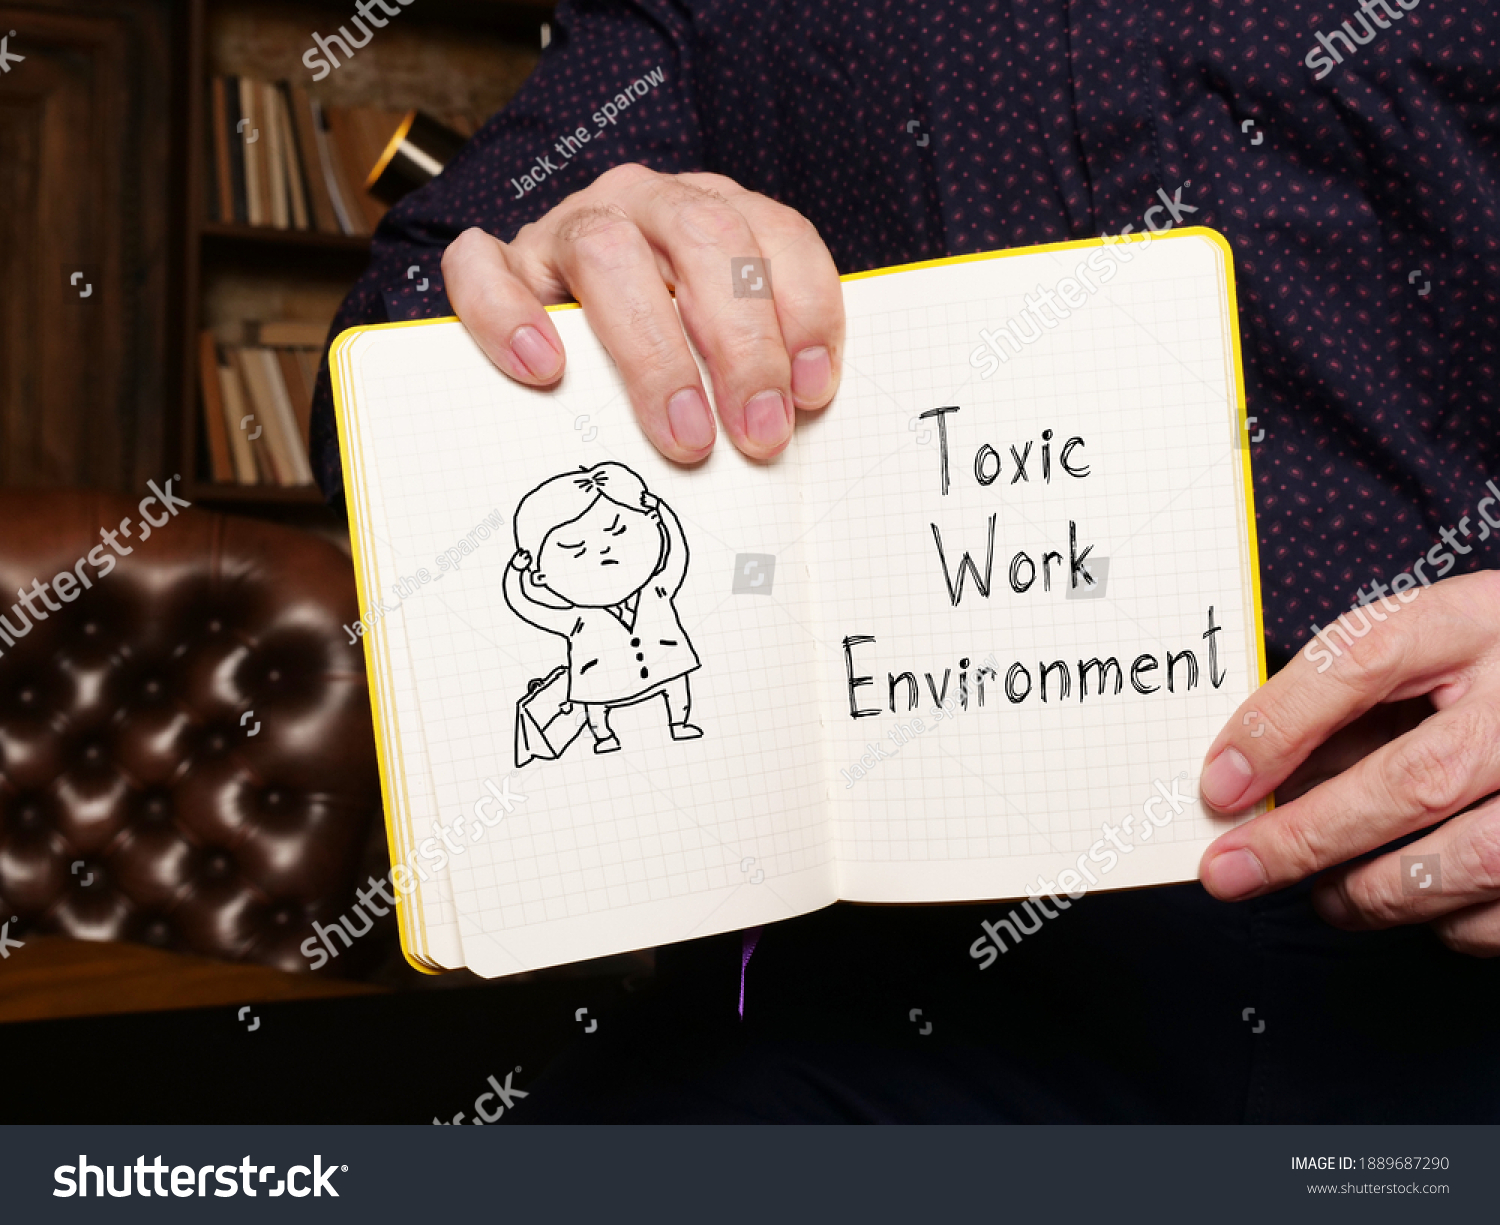 Toxic Work Environment is shown on the conceptual business photo #1889687290